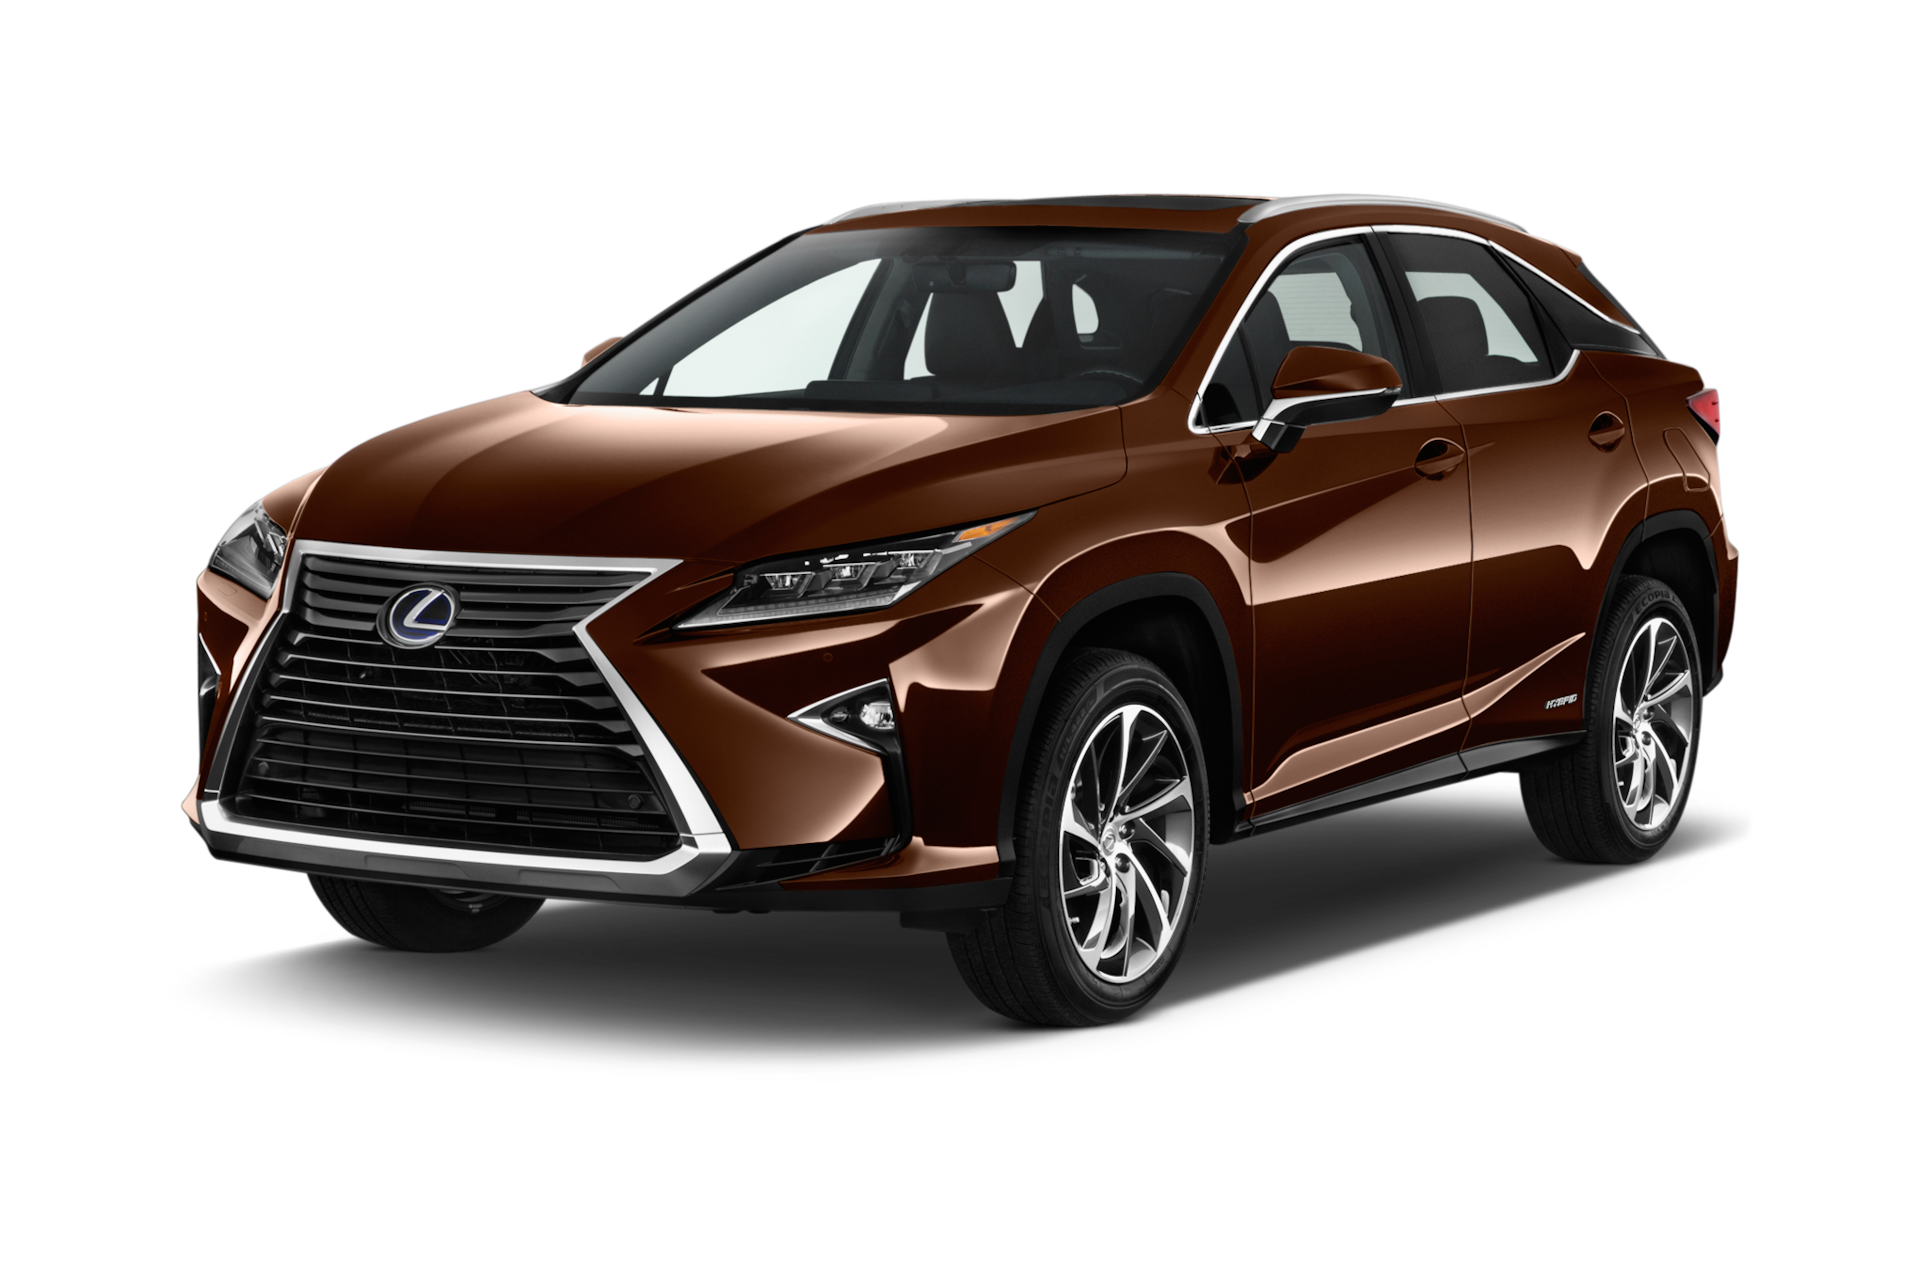 2016 Lexus RX450h Prices, Reviews, and Photos - MotorTrend